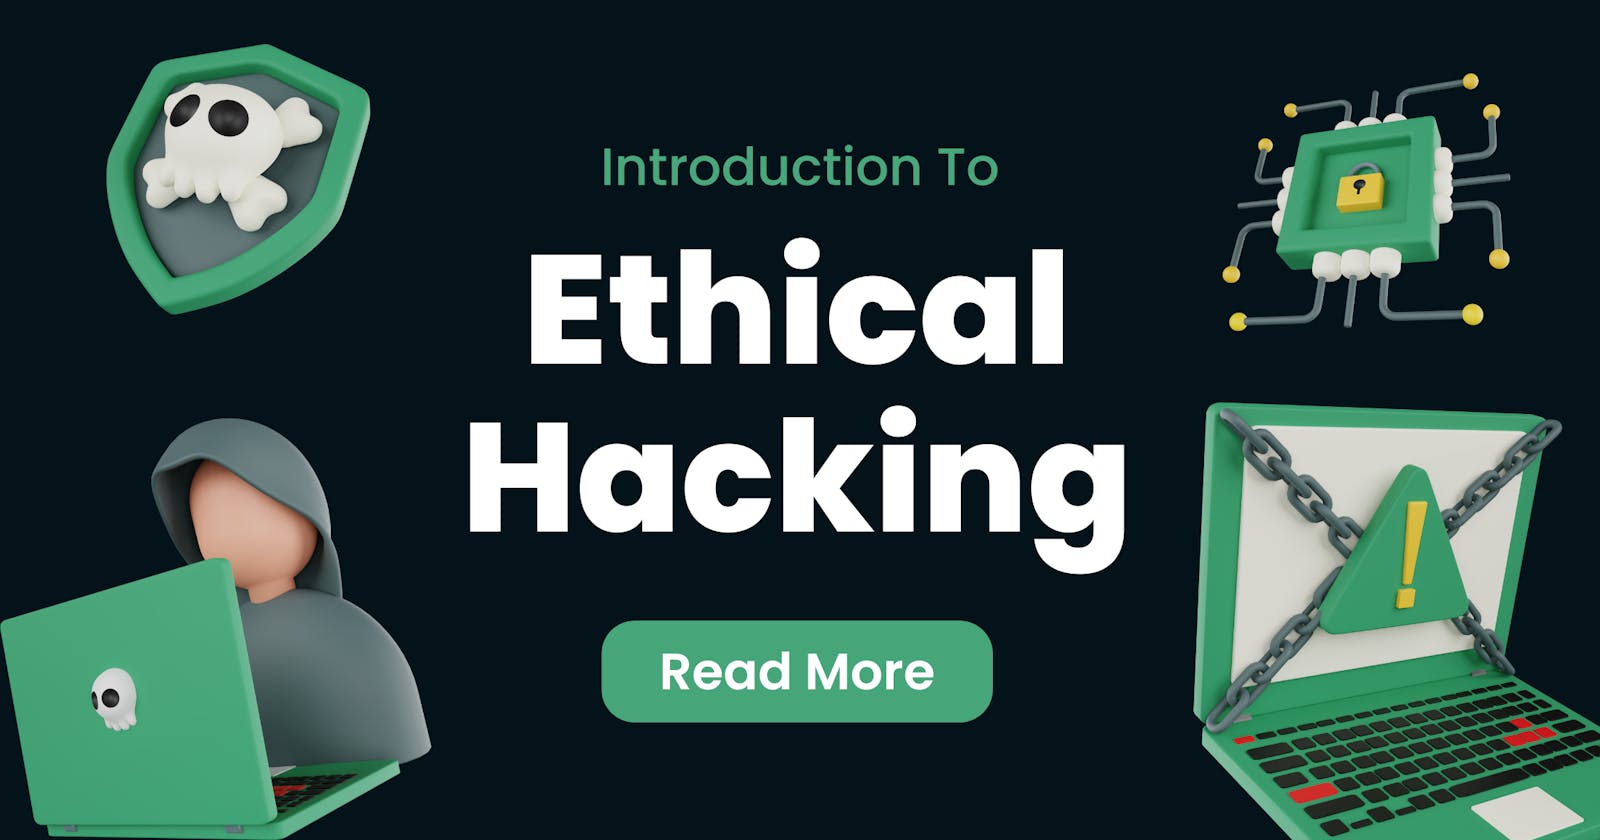 Introduction To Ethical Hacking: Attacks, Tools, Techniques And More